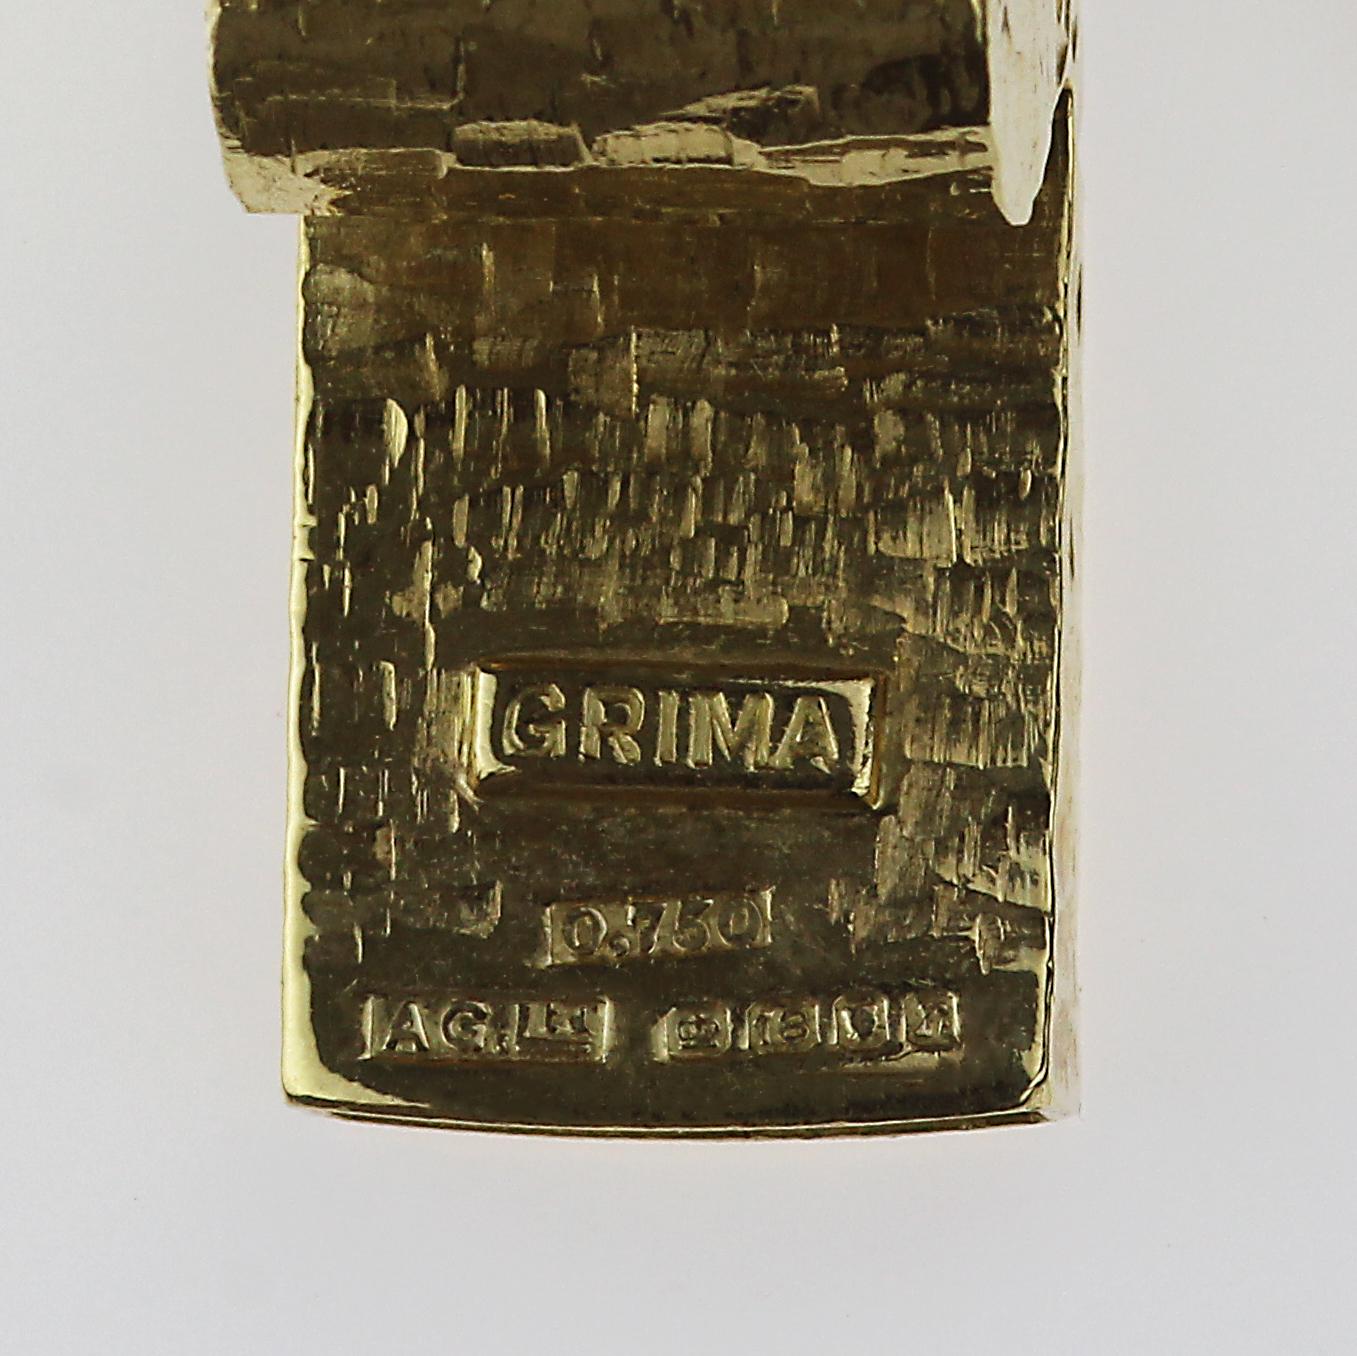 Contemporary Famous Designer Andrew Grima Whistle Key Ring in 18 Carat Gold Limited Pieces